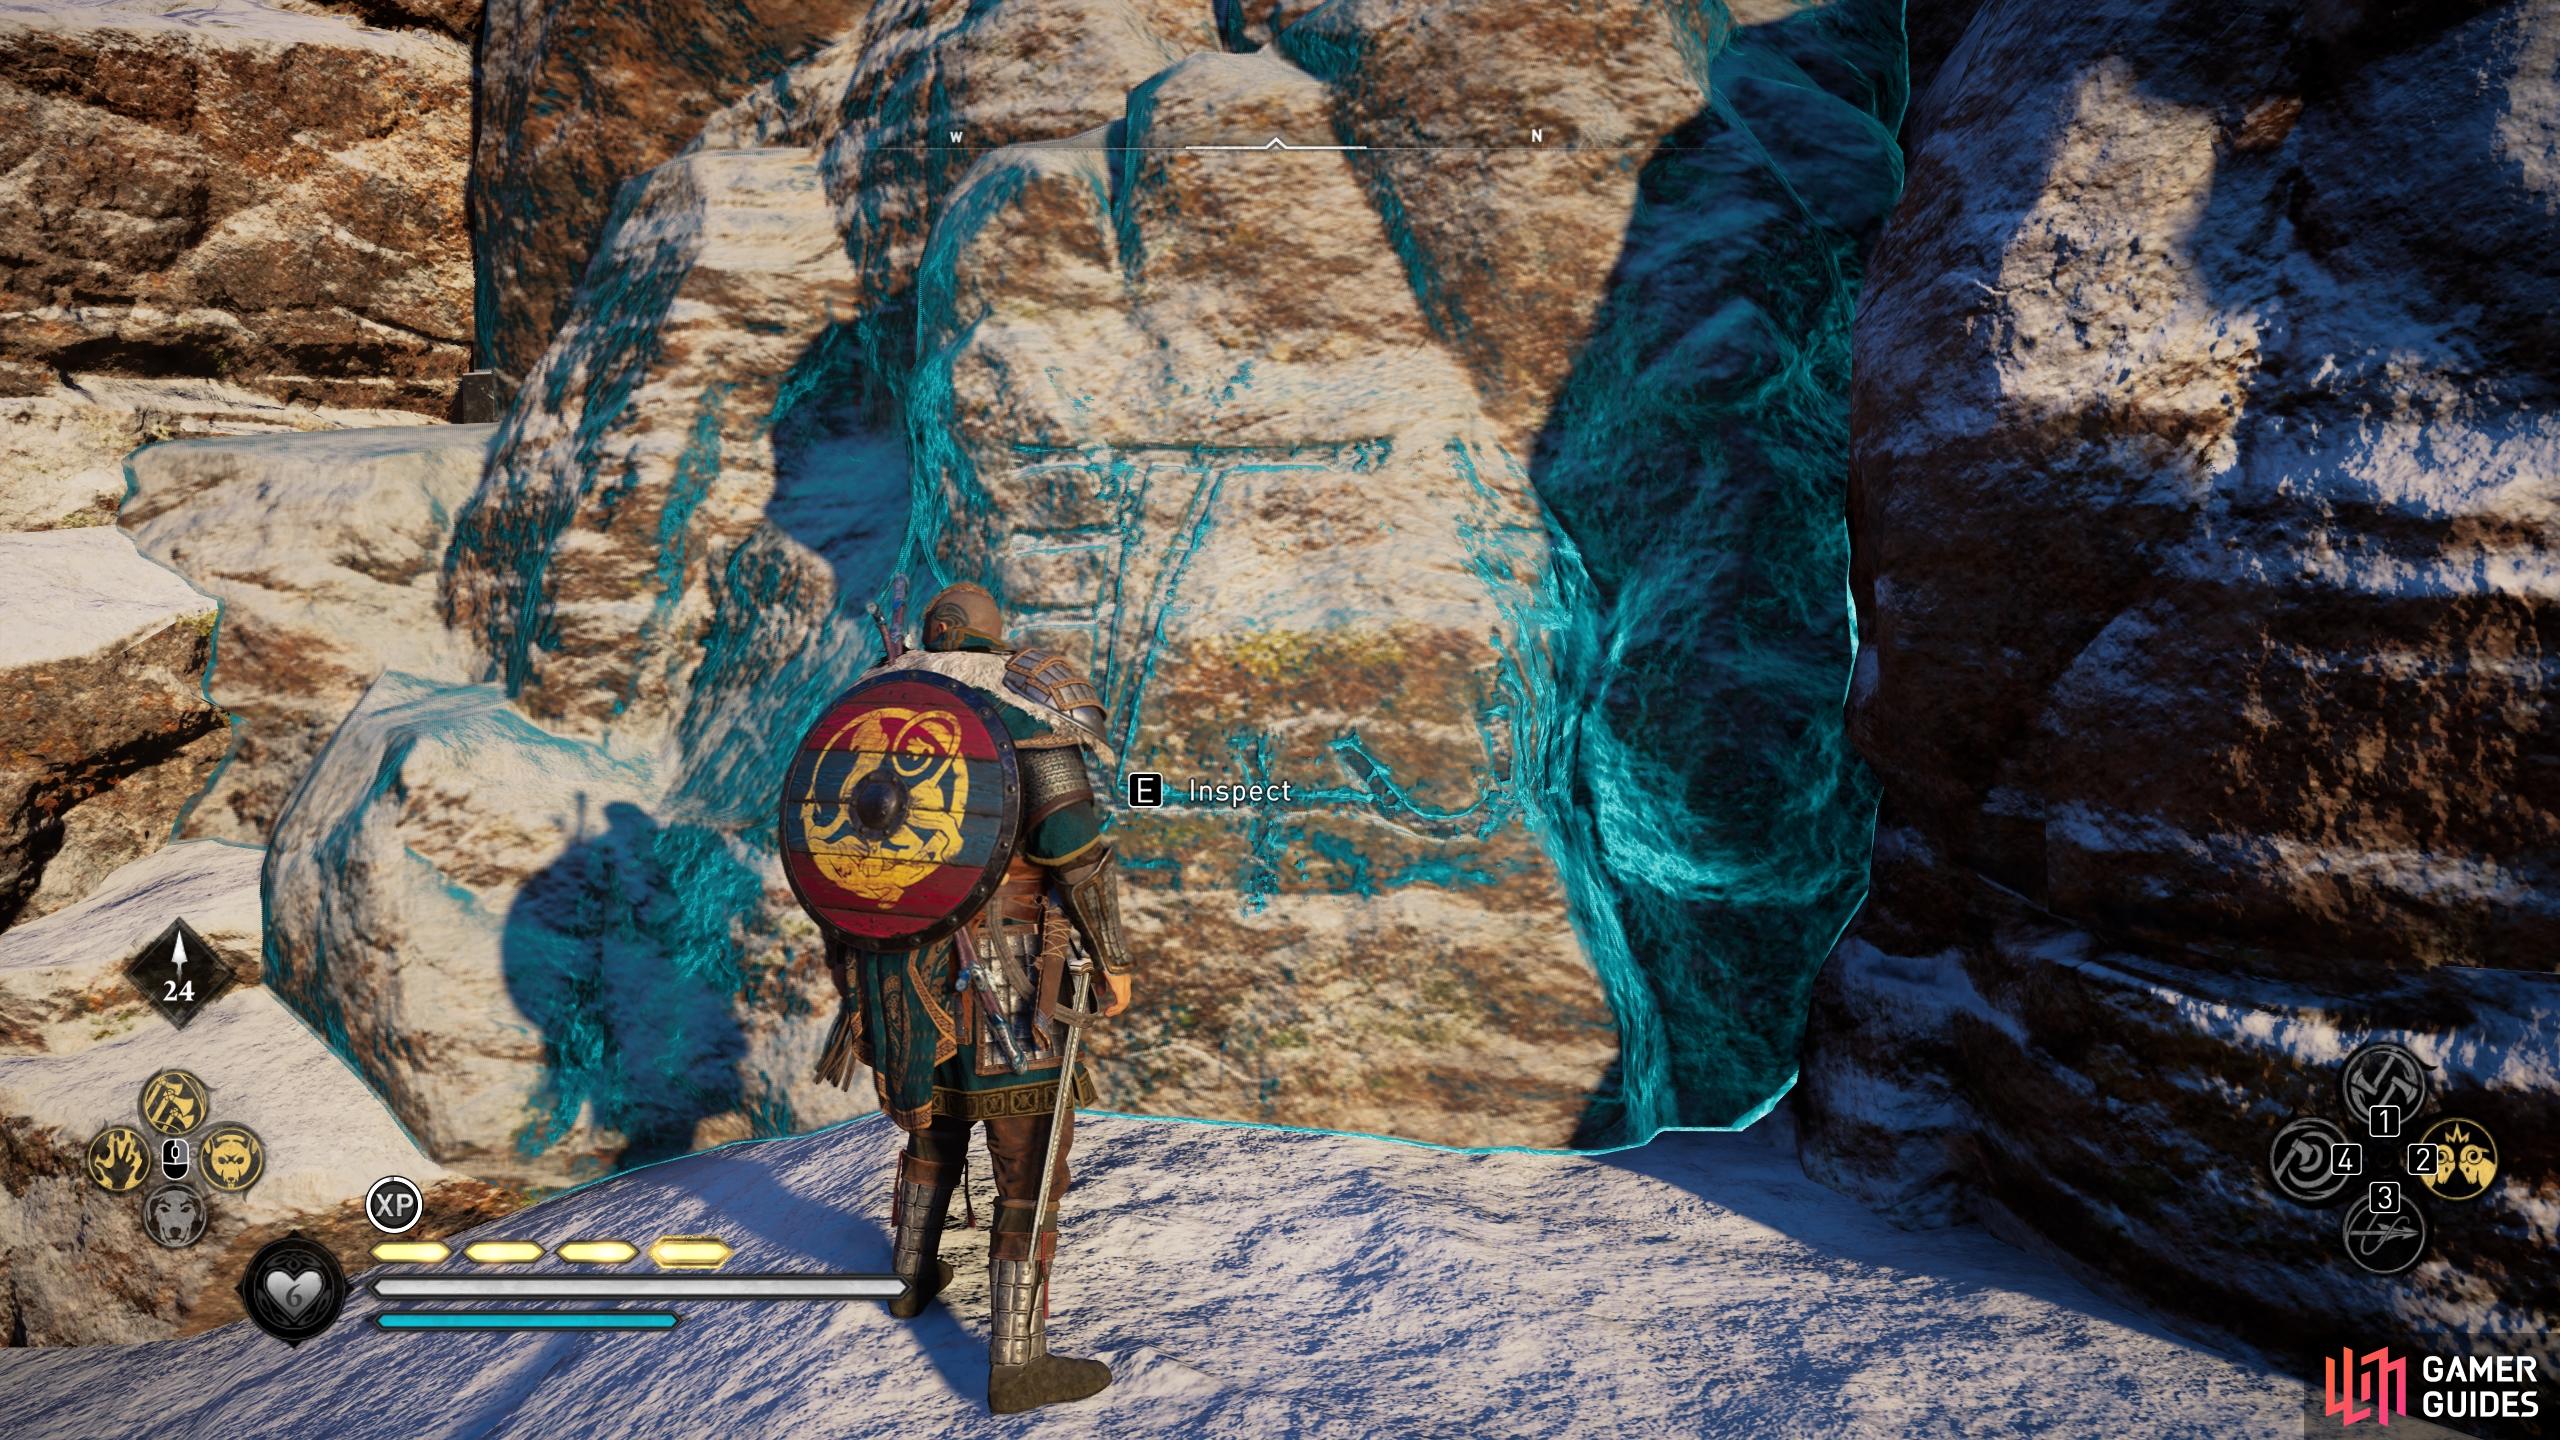 You can use Odin's Sight to highlight the runic inscription, then interact with it to reveal the entrance.